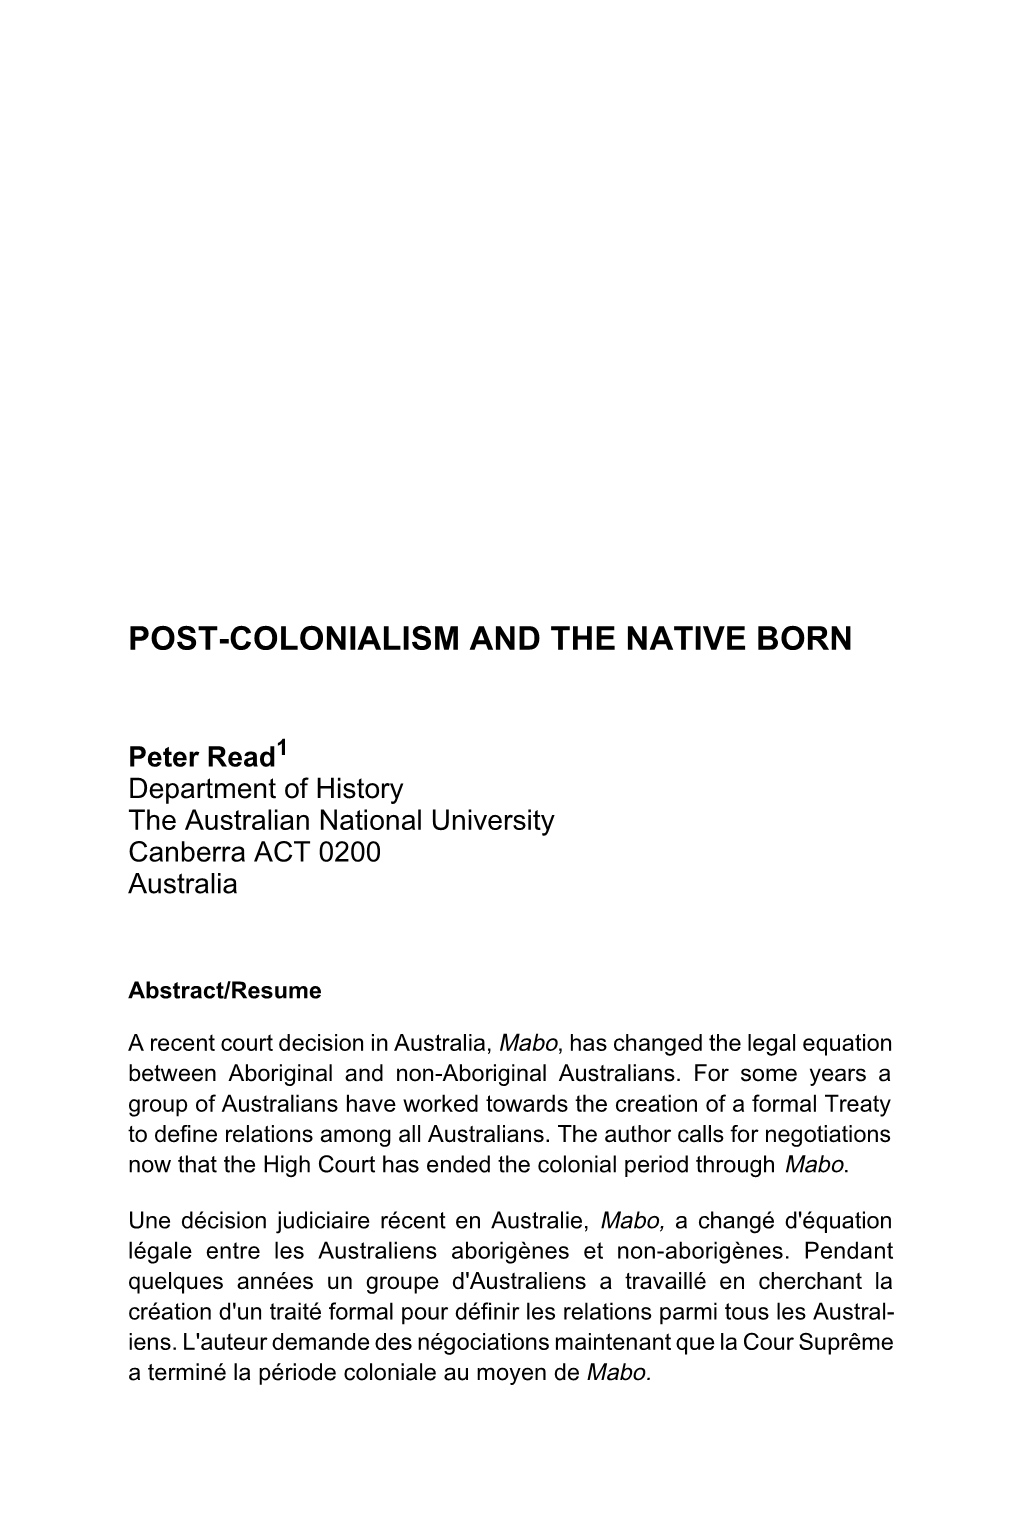 Post-Colonialism and the Native Born